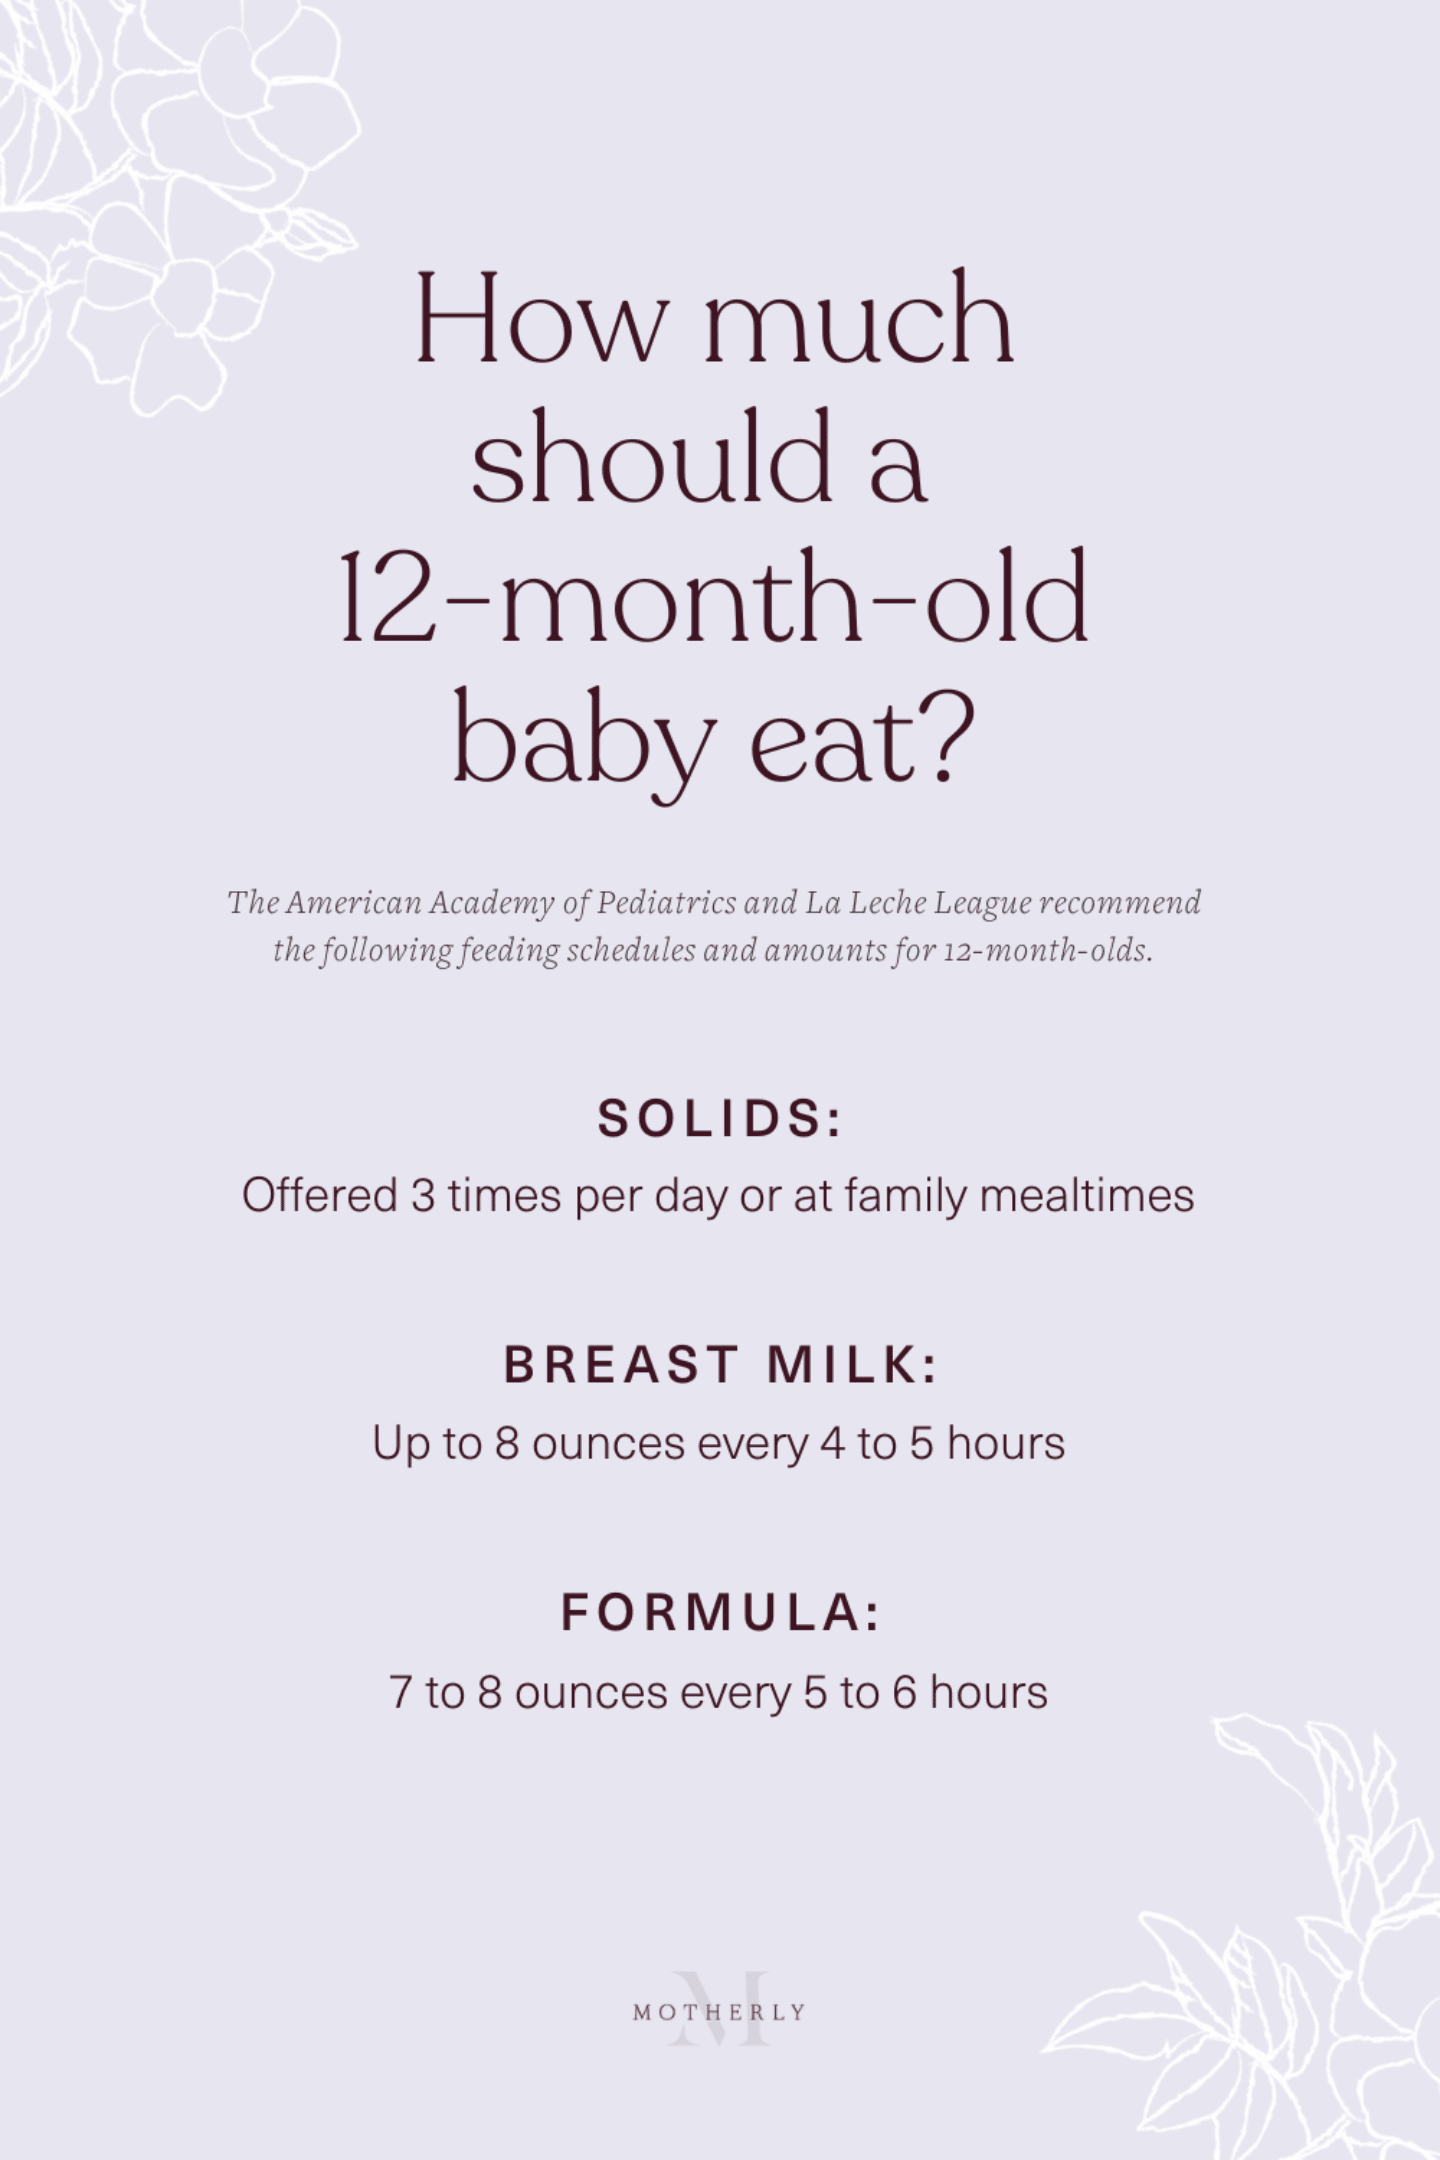 printable summary of 12-month-old baby feeding guide - breast milk and formula
